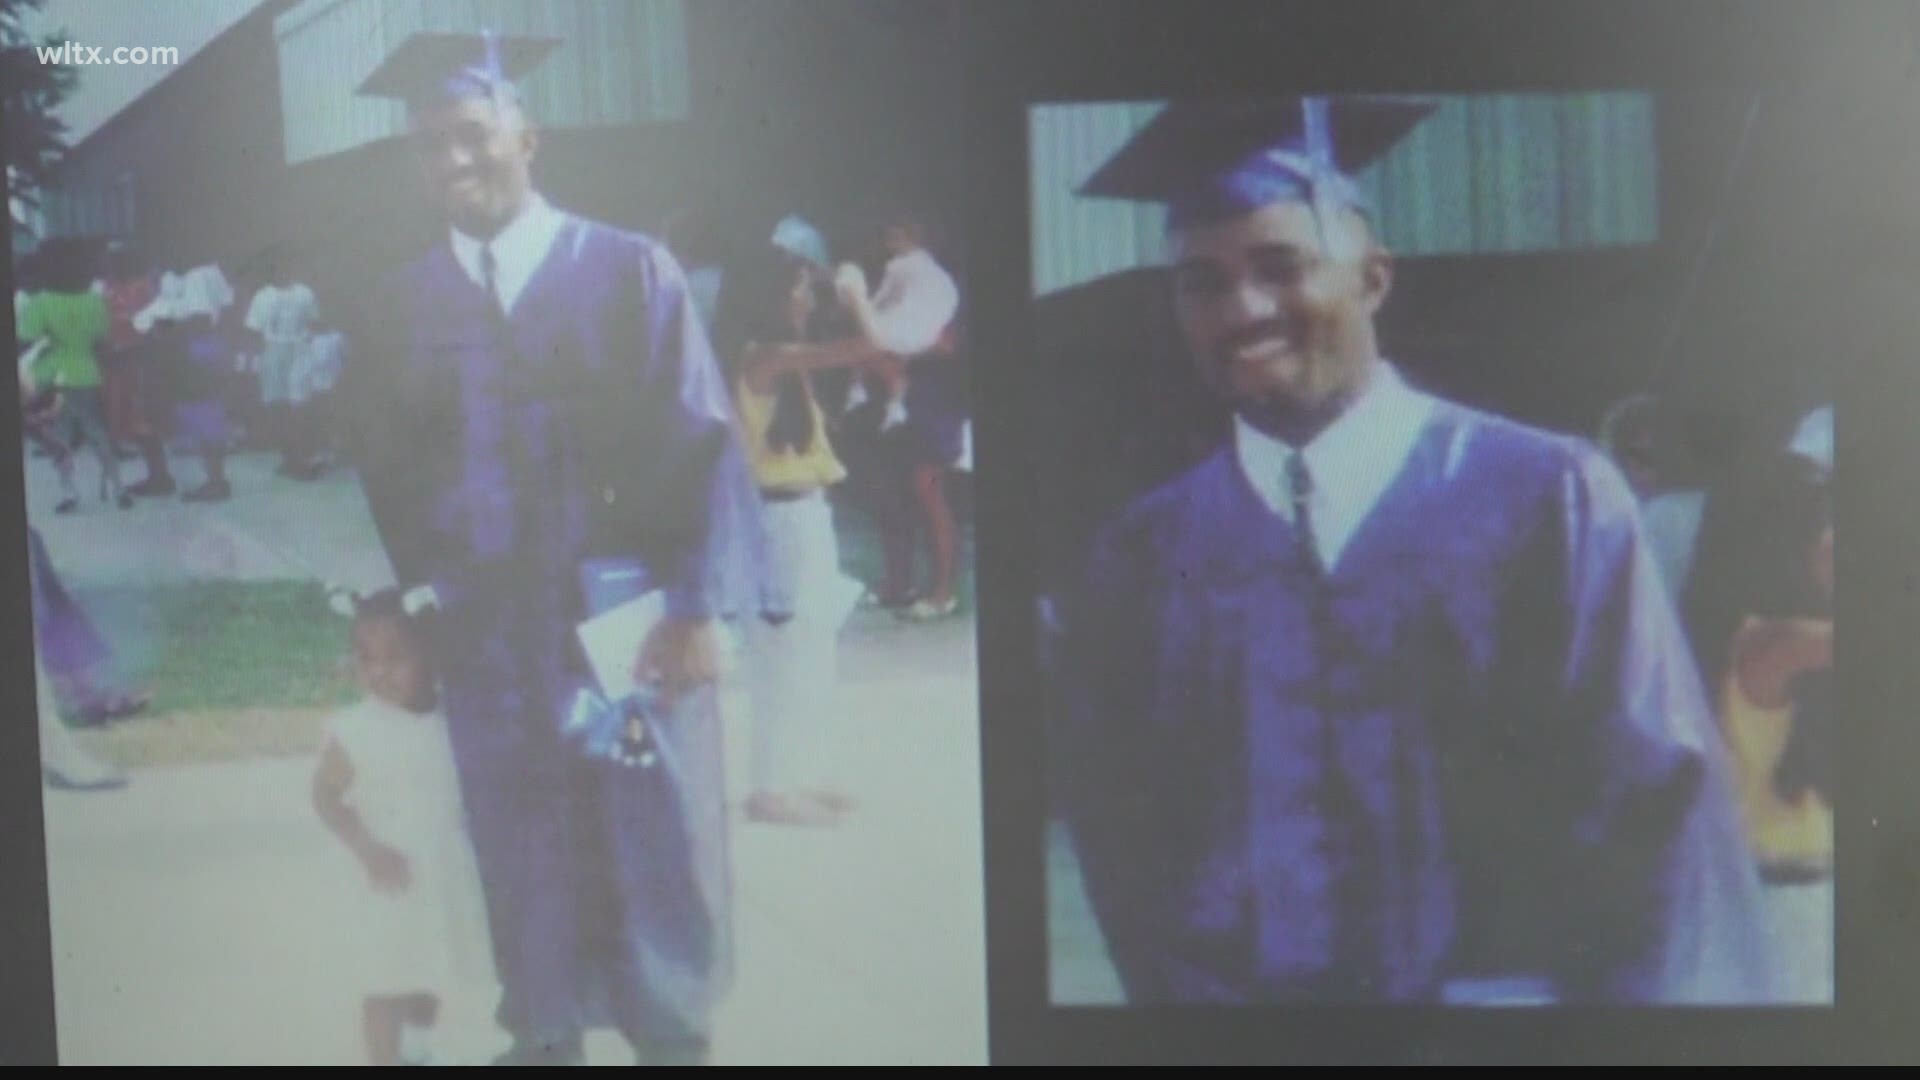 Shelton Sanders was last seen in Columbia, where he attended school at the University of South Carolina